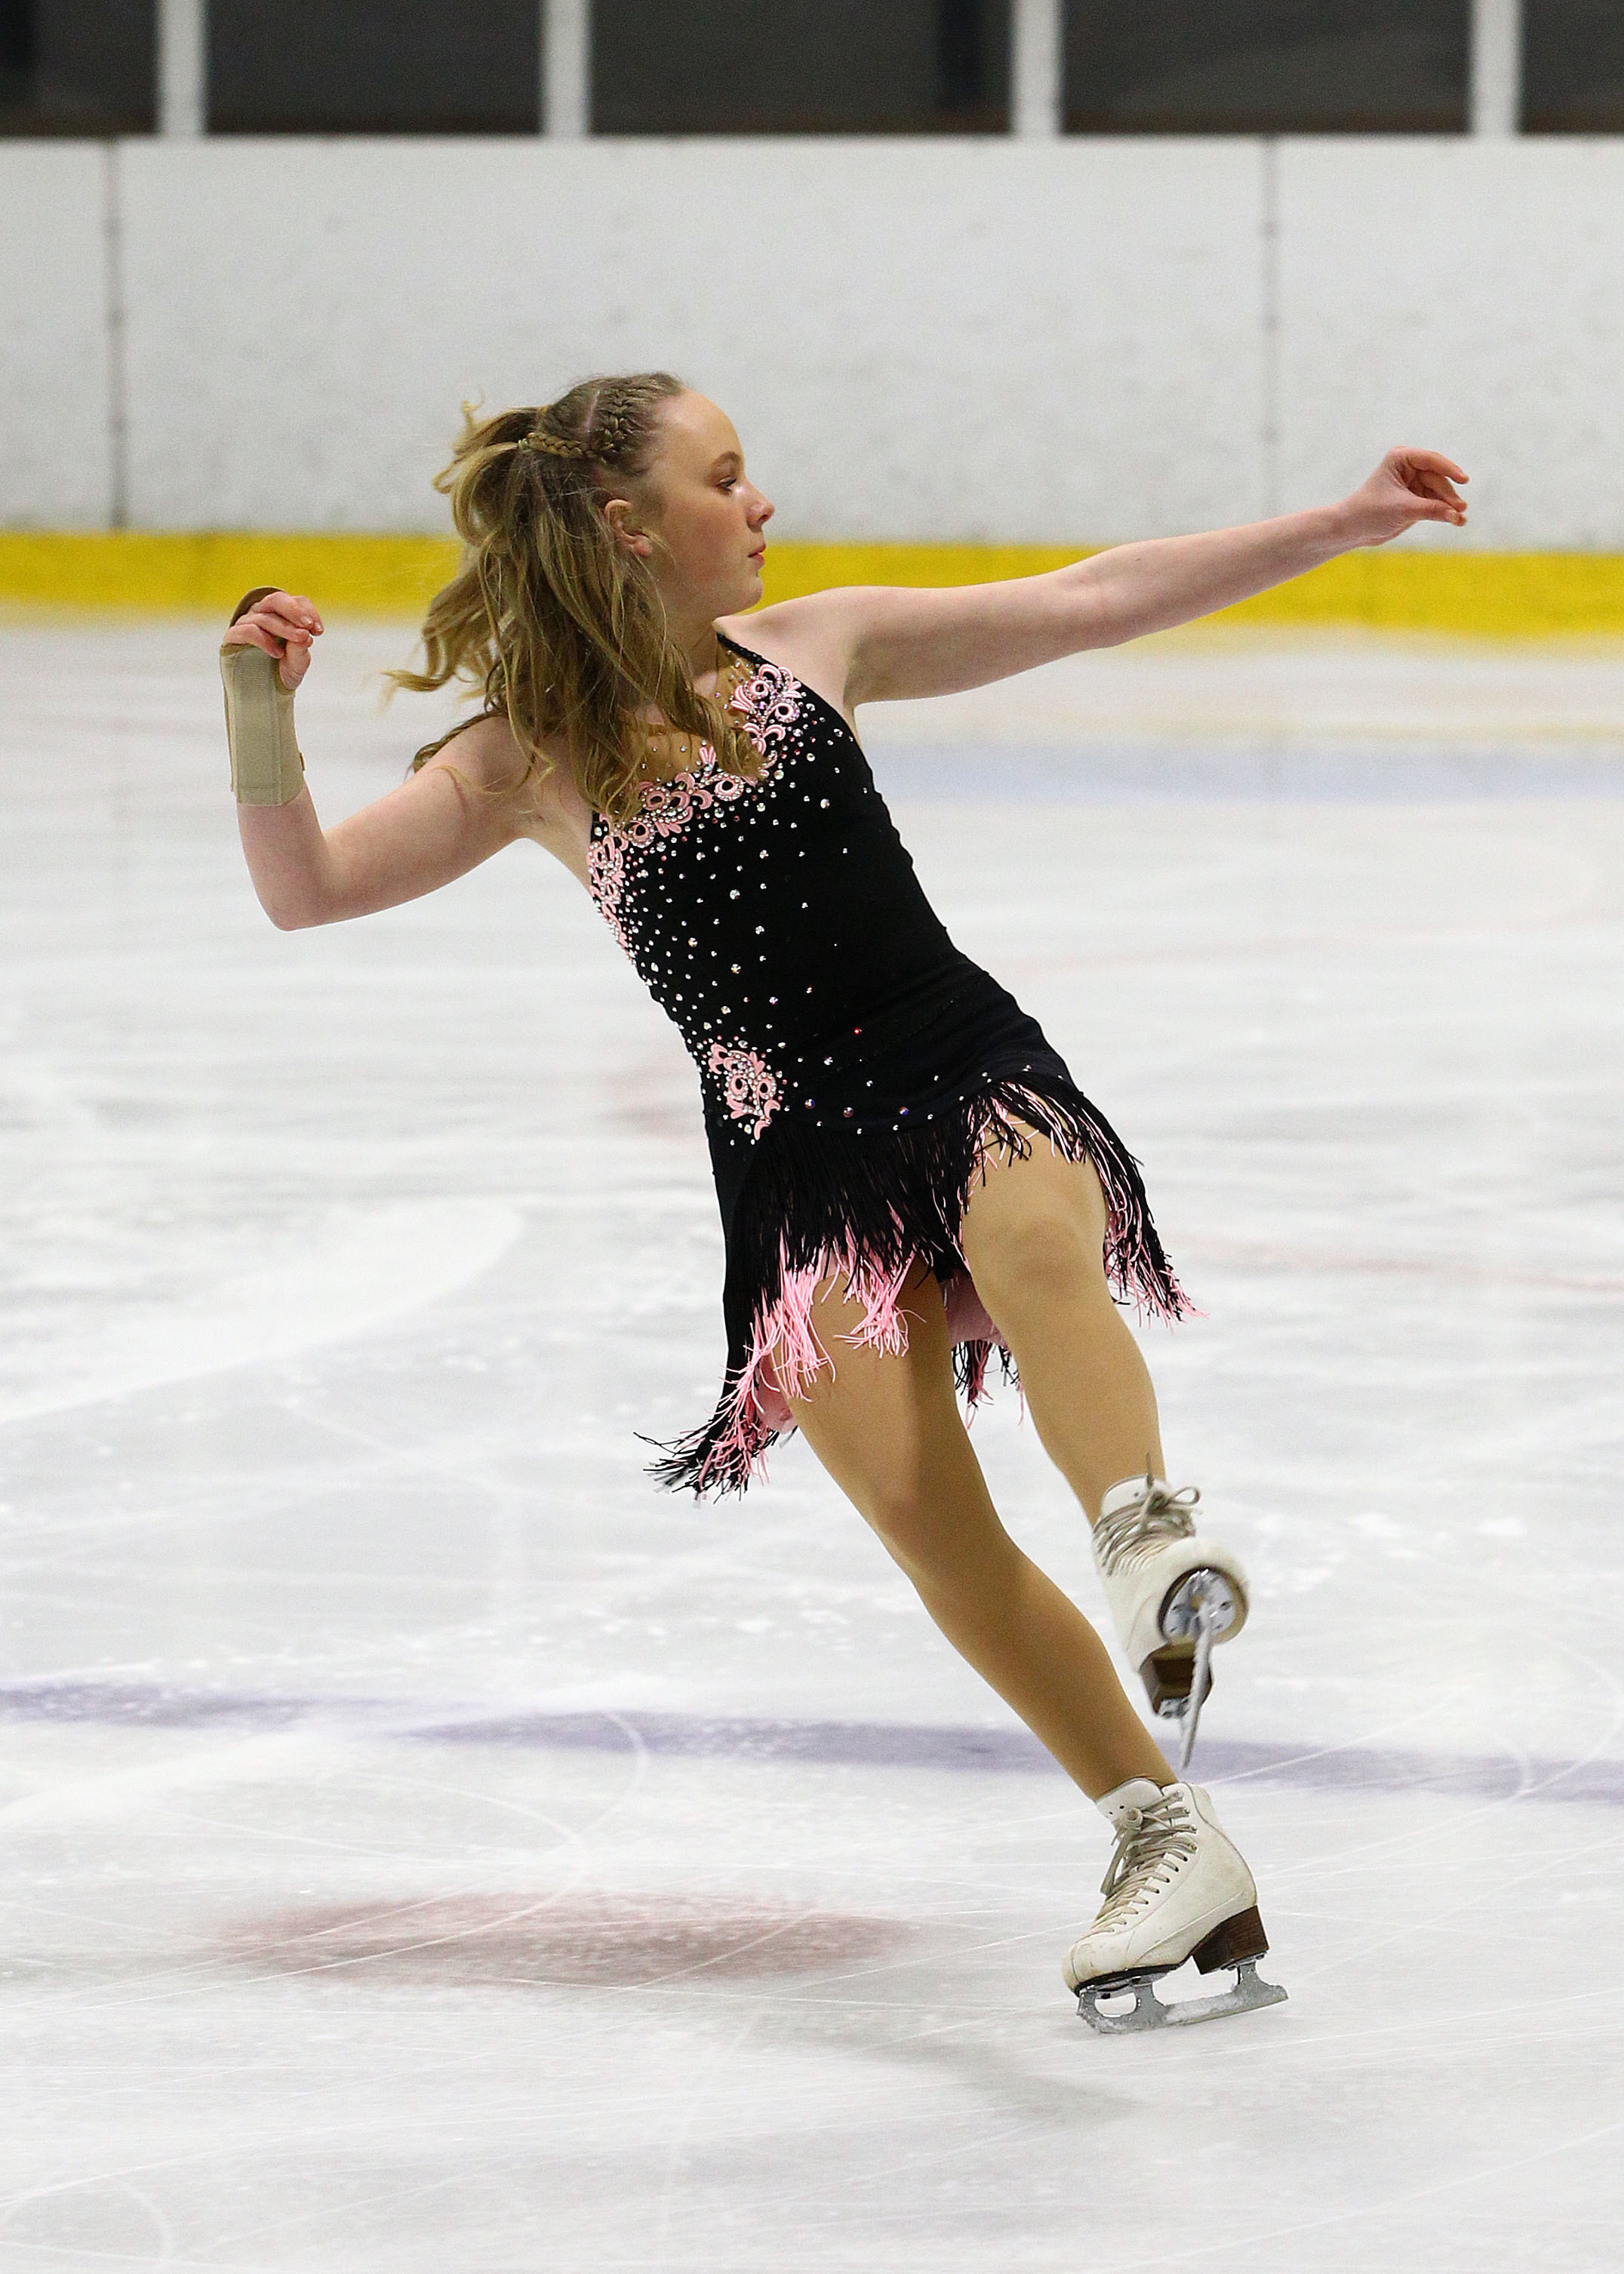 Grateful - ice skater Aimee Carrington, 16 would not have been able to follow her dream of being an ice skater if not for the help of the foundation